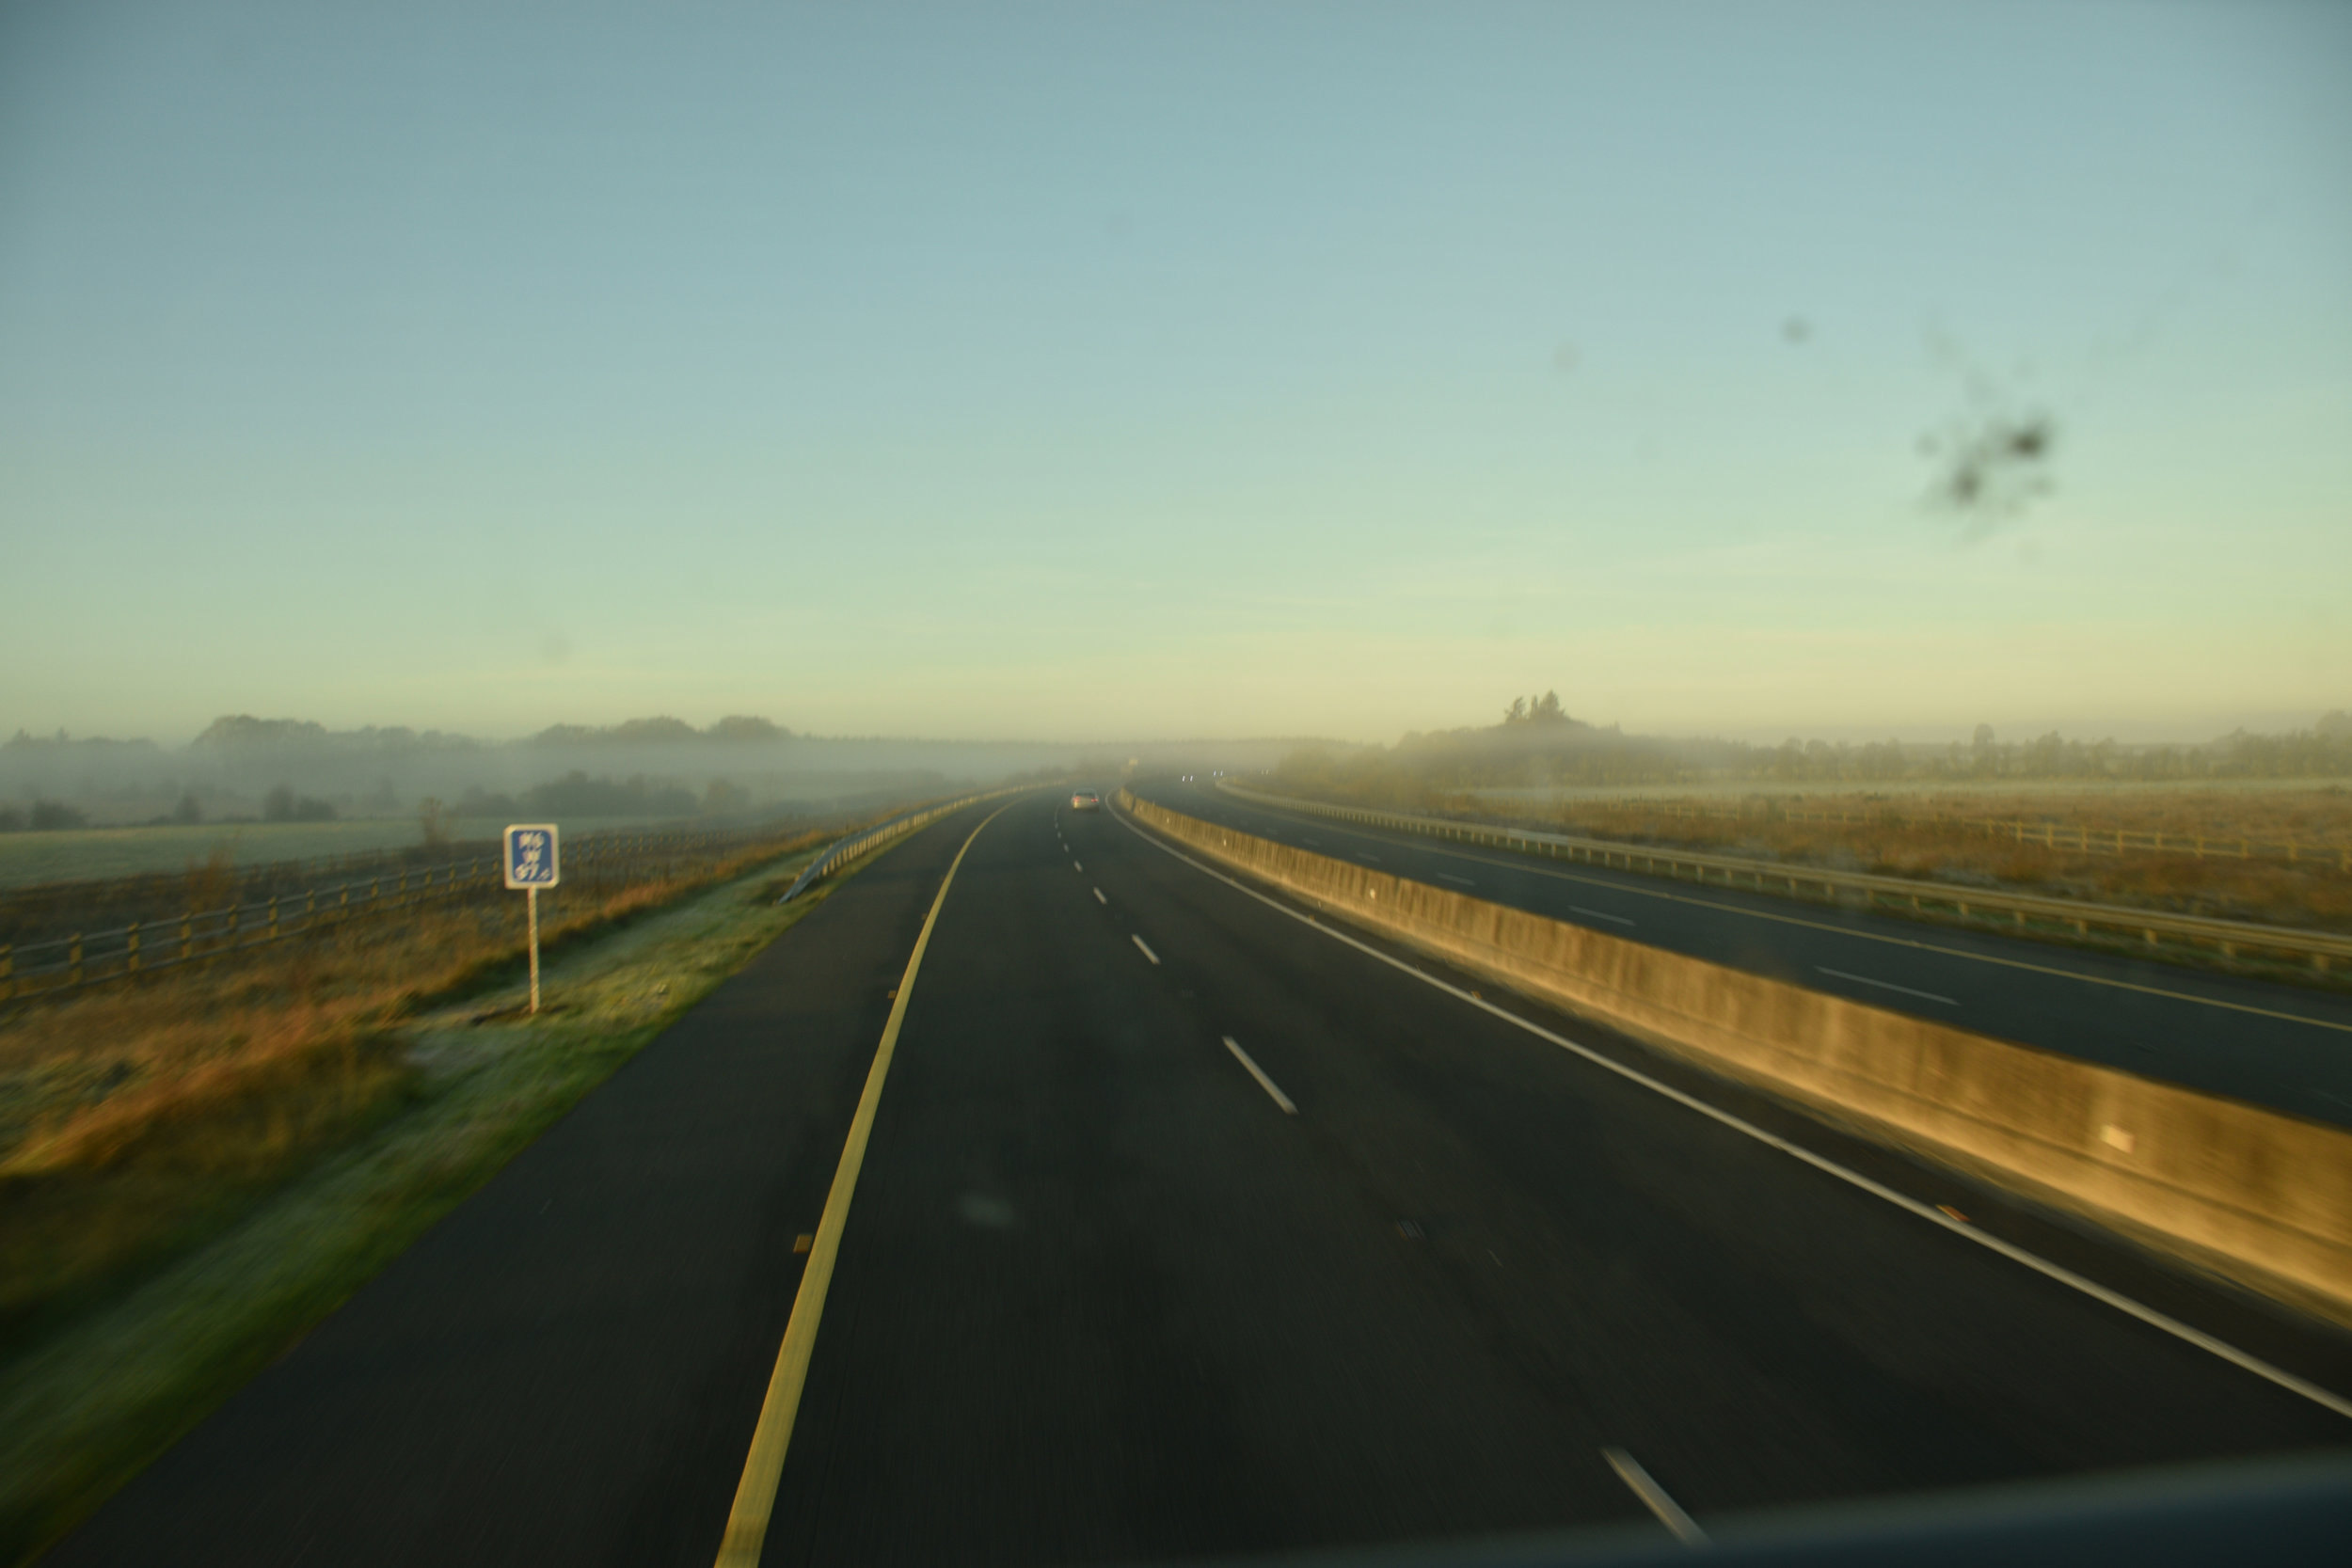 The morning fog surrounds an empty road